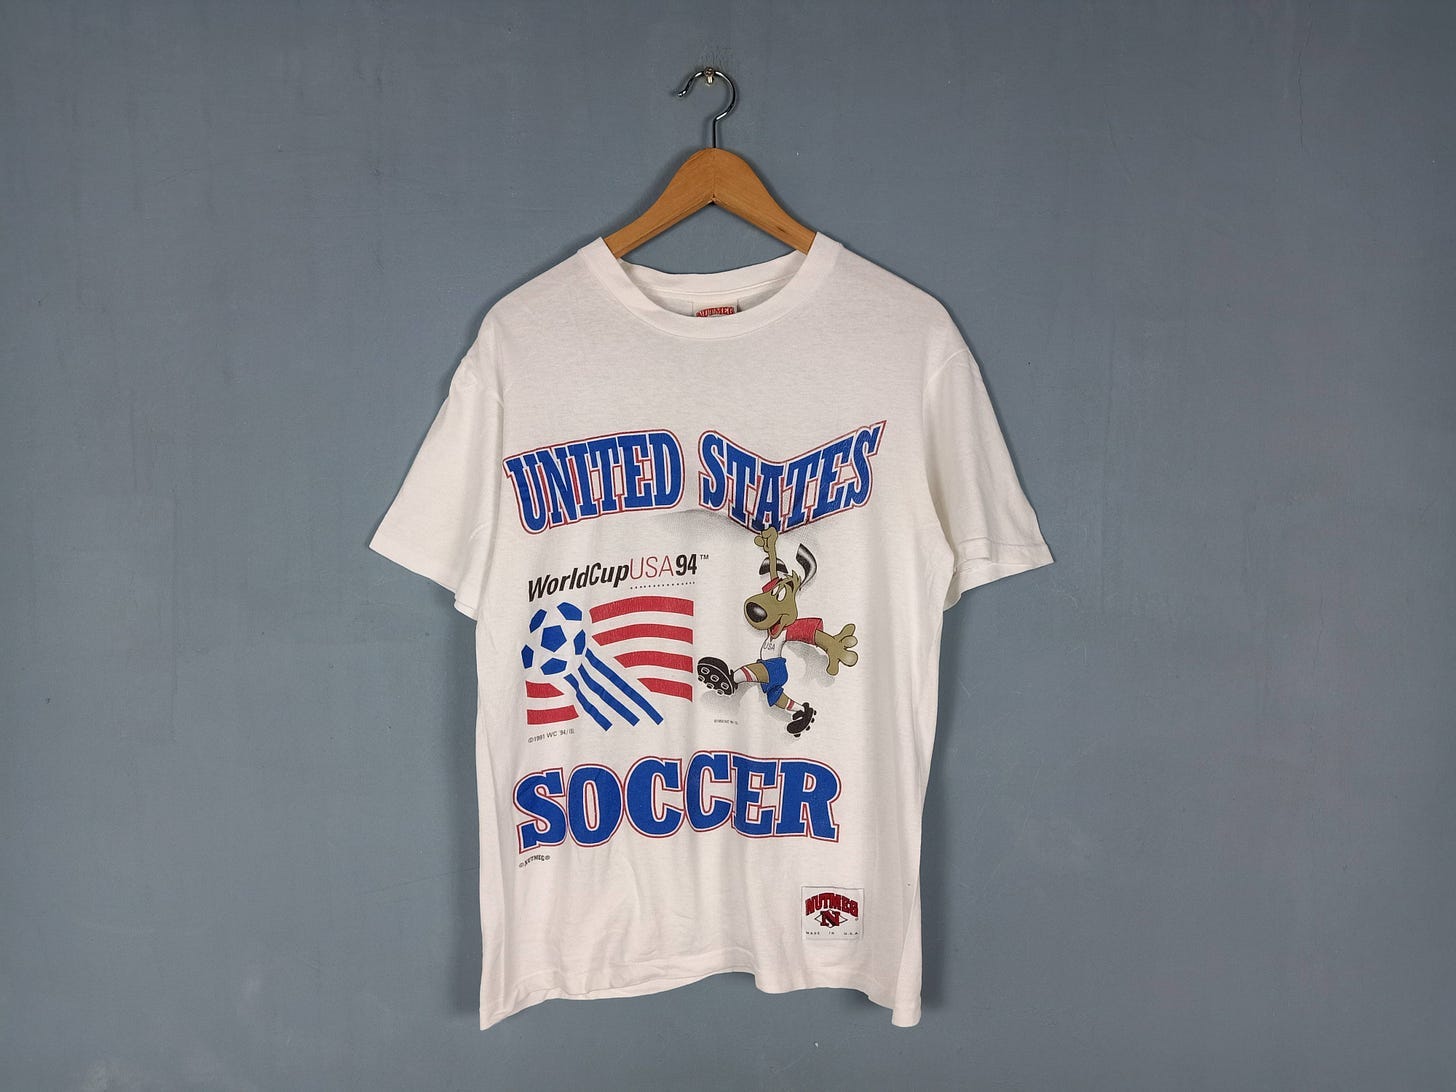 Image result from https://www.grailed.com/listings/16368256-nutmeg-mills-x-vintage-1994-world-cup-usa-soccer-team-tee